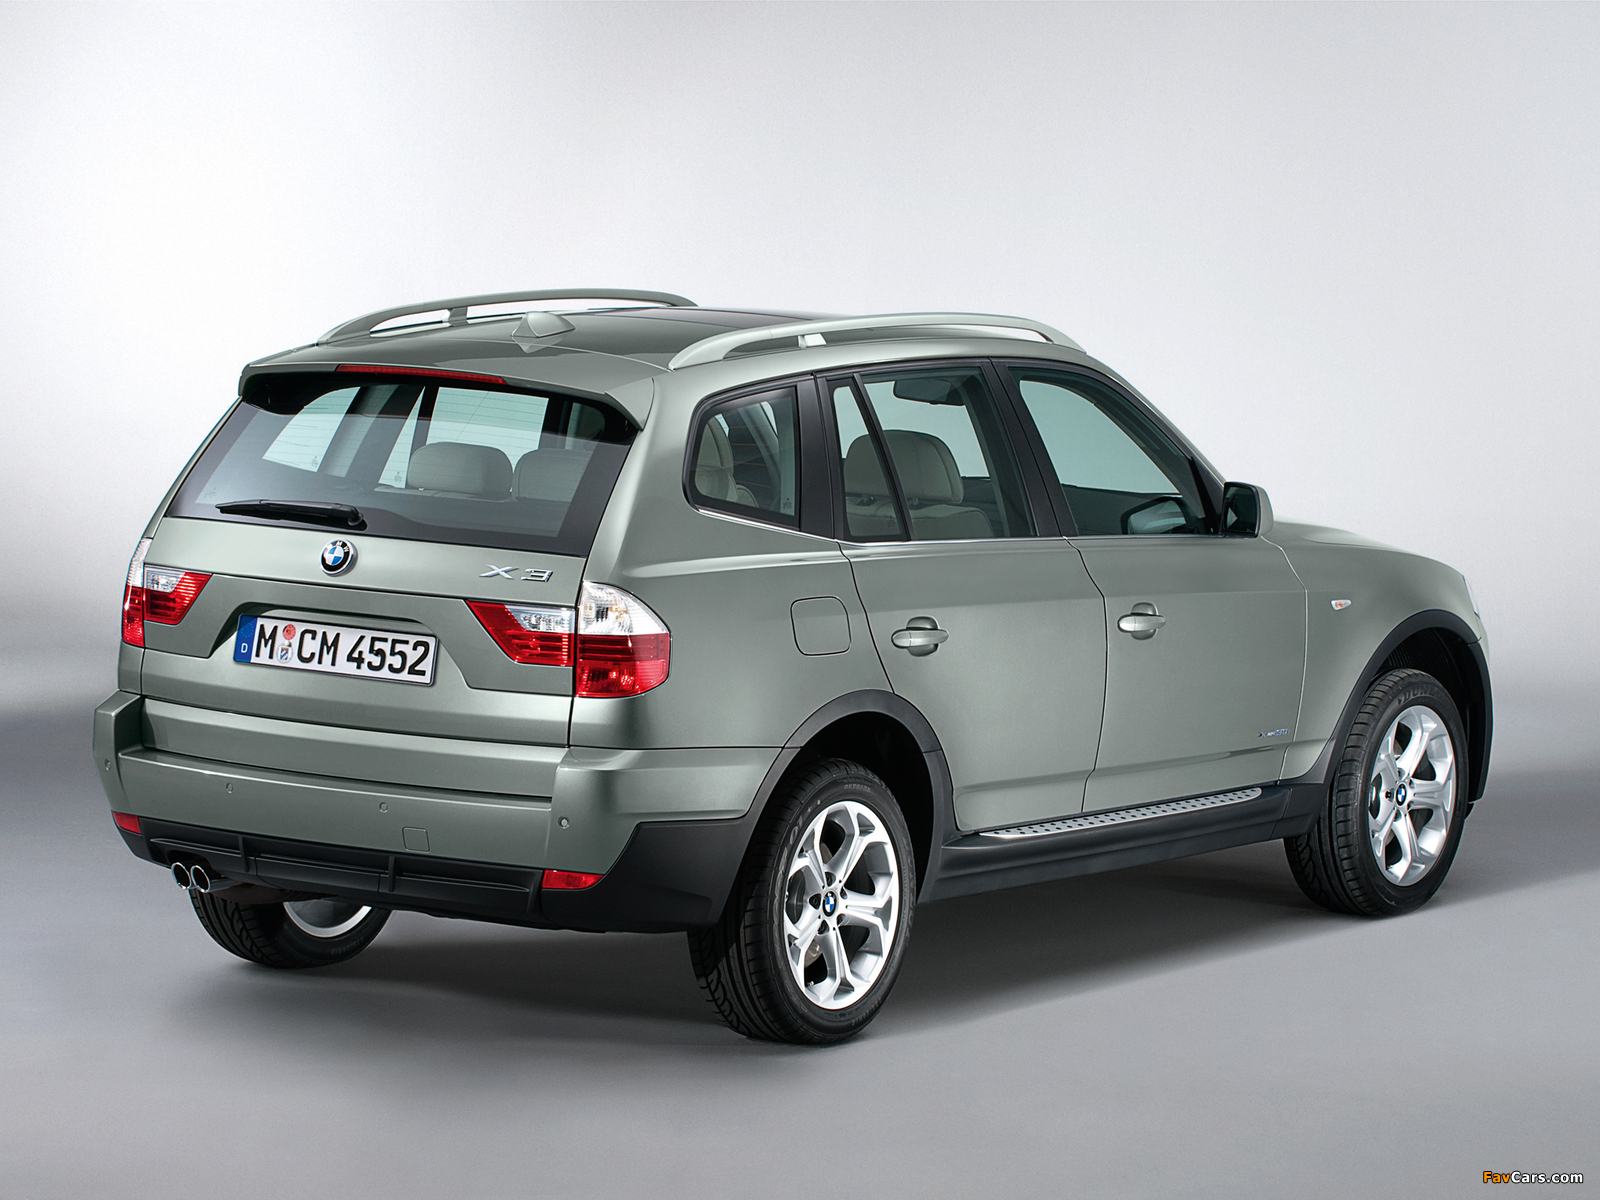 BMW X3 xDrive30i Exclusive Edition (E83) 2008 wallpapers (1600 x 1200)